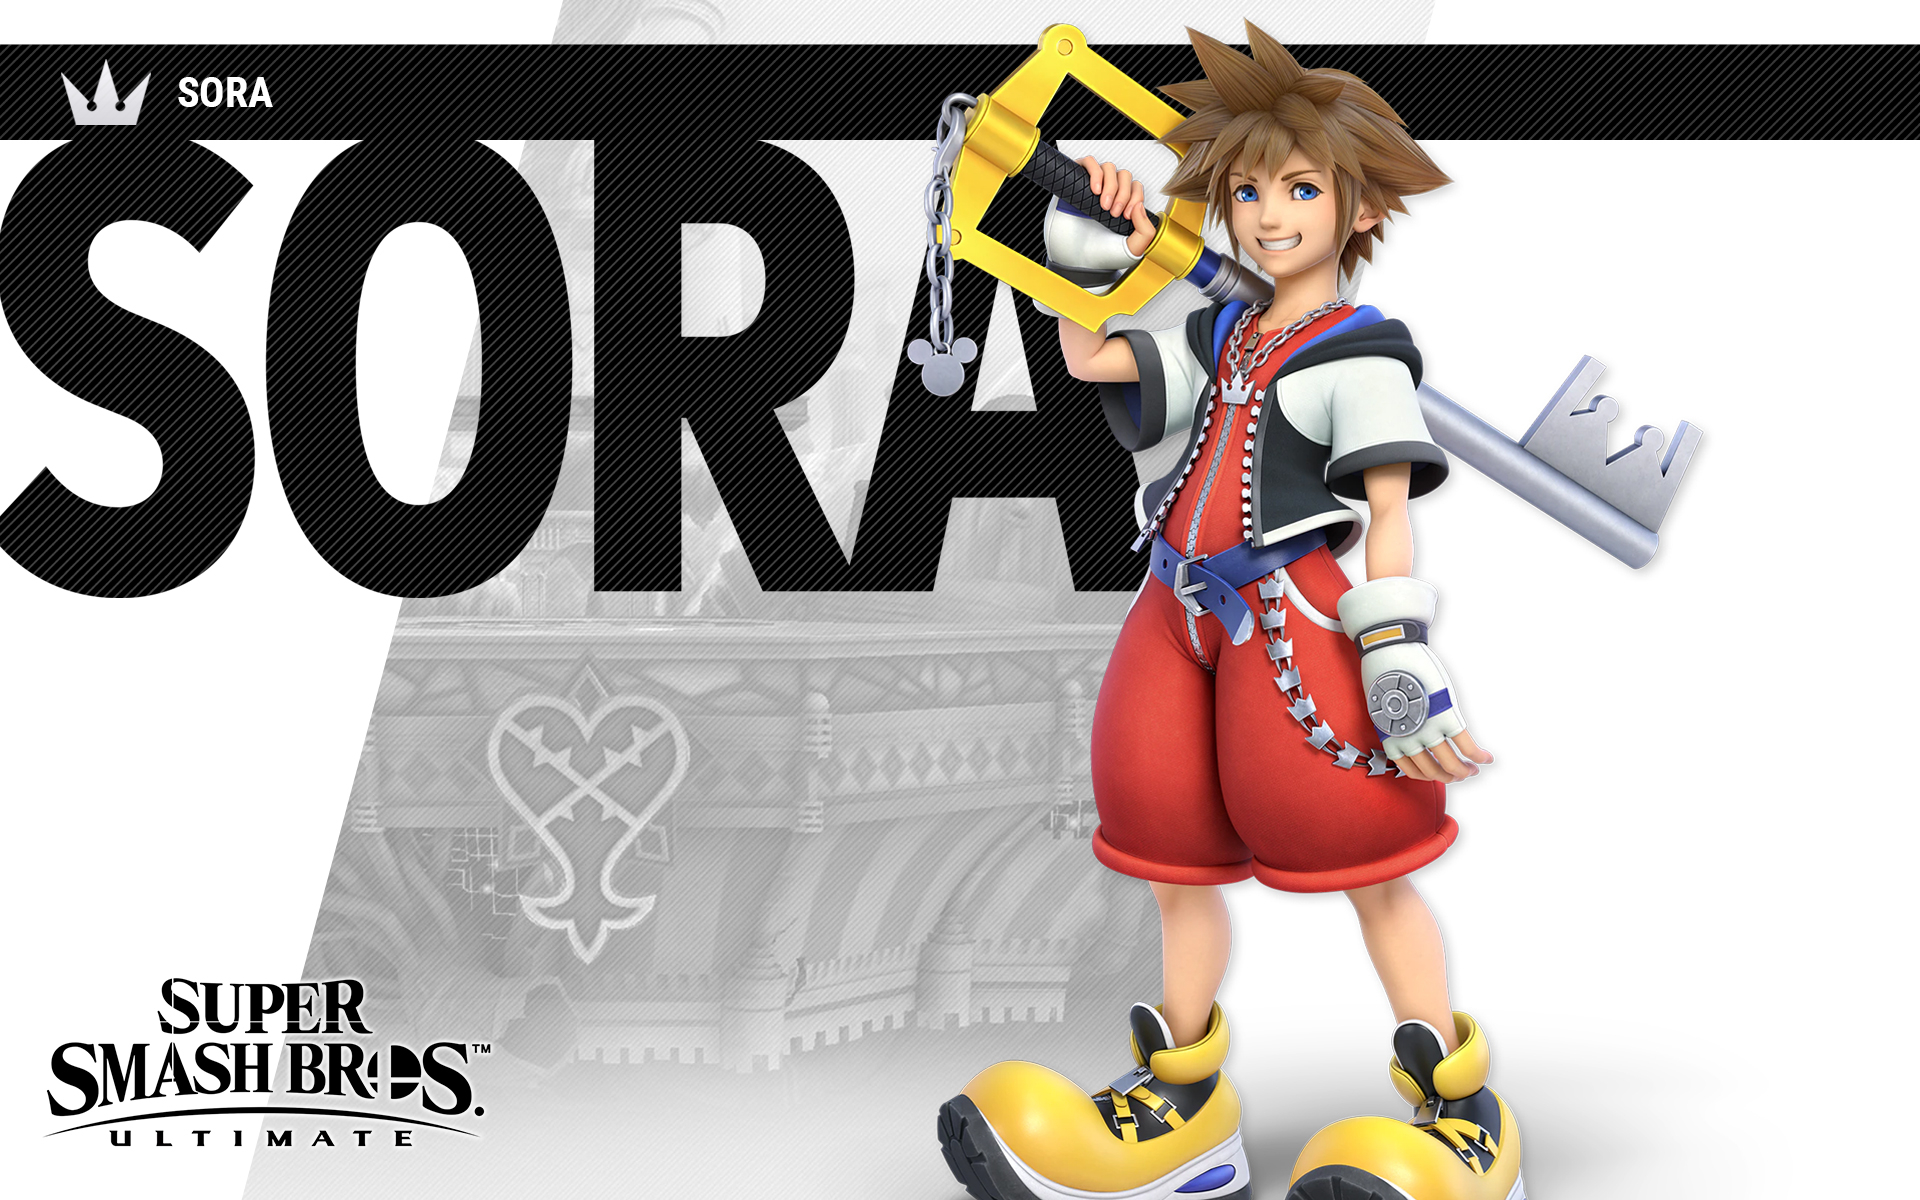 1920x1200 Super Smash Bros Ultimate Sora Wallpapers Cat with Monocle